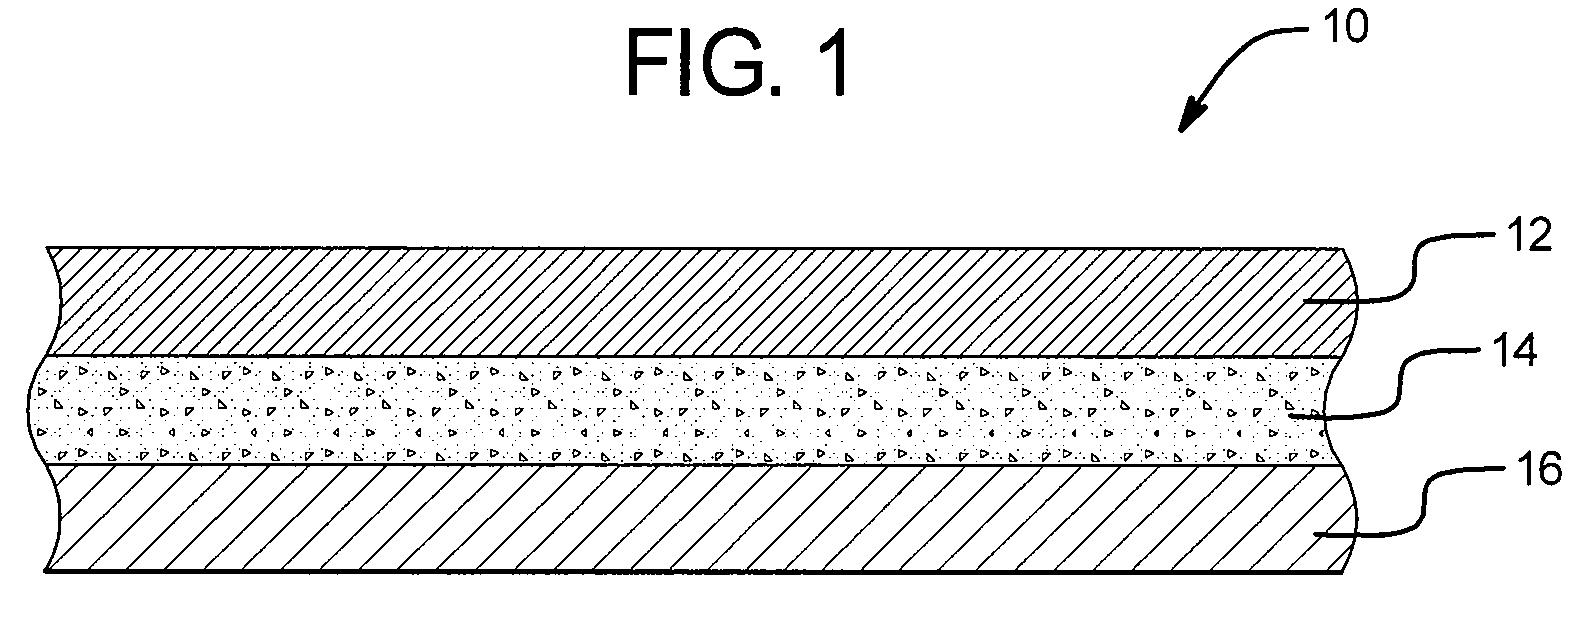 Safety device for drug delivery devices and containers